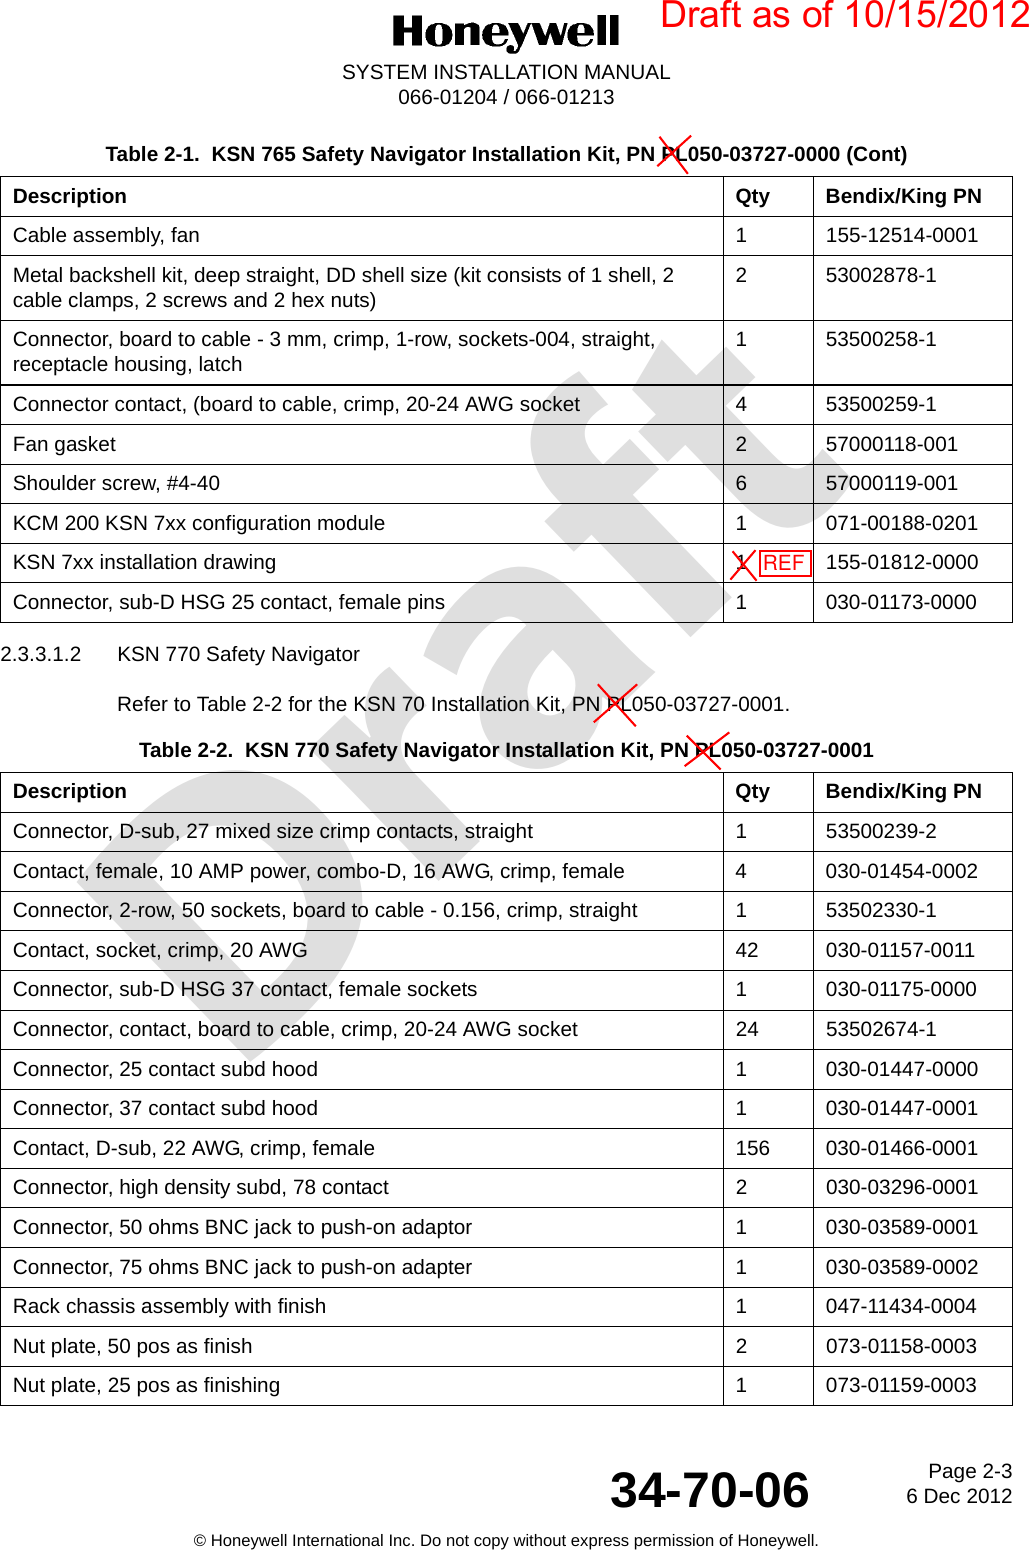 DraftPage 2-36 Dec 201234-70-06SYSTEM INSTALLATION MANUAL066-01204 / 066-01213© Honeywell International Inc. Do not copy without express permission of Honeywell.2.3.3.1.2 KSN 770 Safety NavigatorRefer to Table 2-2 for the KSN 70 Installation Kit, PN PL050-03727-0001.Cable assembly, fan 1 155-12514-0001Metal backshell kit, deep straight, DD shell size (kit consists of 1 shell, 2 cable clamps, 2 screws and 2 hex nuts) 2 53002878-1Connector, board to cable - 3 mm, crimp, 1-row, sockets-004, straight, receptacle housing, latch 1 53500258-1Connector contact, (board to cable, crimp, 20-24 AWG socket 4 53500259-1Fan gasket 2 57000118-001Shoulder screw, #4-40 6 57000119-001KCM 200 KSN 7xx configuration module 1 071-00188-0201KSN 7xx installation drawing 1 155-01812-0000Connector, sub-D HSG 25 contact, female pins 1 030-01173-0000Table 2-2.  KSN 770 Safety Navigator Installation Kit, PN PL050-03727-0001 Description Qty Bendix/King PNConnector, D-sub, 27 mixed size crimp contacts, straight 1 53500239-2Contact, female, 10 AMP power, combo-D, 16 AWG, crimp, female 4 030-01454-0002Connector, 2-row, 50 sockets, board to cable - 0.156, crimp, straight 1 53502330-1Contact, socket, crimp, 20 AWG 42 030-01157-0011Connector, sub-D HSG 37 contact, female sockets 1 030-01175-0000Connector, contact, board to cable, crimp, 20-24 AWG socket 24 53502674-1Connector, 25 contact subd hood 1 030-01447-0000Connector, 37 contact subd hood 1 030-01447-0001Contact, D-sub, 22 AWG, crimp, female 156 030-01466-0001Connector, high density subd, 78 contact 2 030-03296-0001Connector, 50 ohms BNC jack to push-on adaptor 1 030-03589-0001Connector, 75 ohms BNC jack to push-on adapter 1 030-03589-0002Rack chassis assembly with finish 1 047-11434-0004Nut plate, 50 pos as finish 2 073-01158-0003Nut plate, 25 pos as finishing 1 073-01159-0003Table 2-1.  KSN 765 Safety Navigator Installation Kit, PN PL050-03727-0000 (Cont)Description Qty Bendix/King PNDraft as of 10/15/2012REF